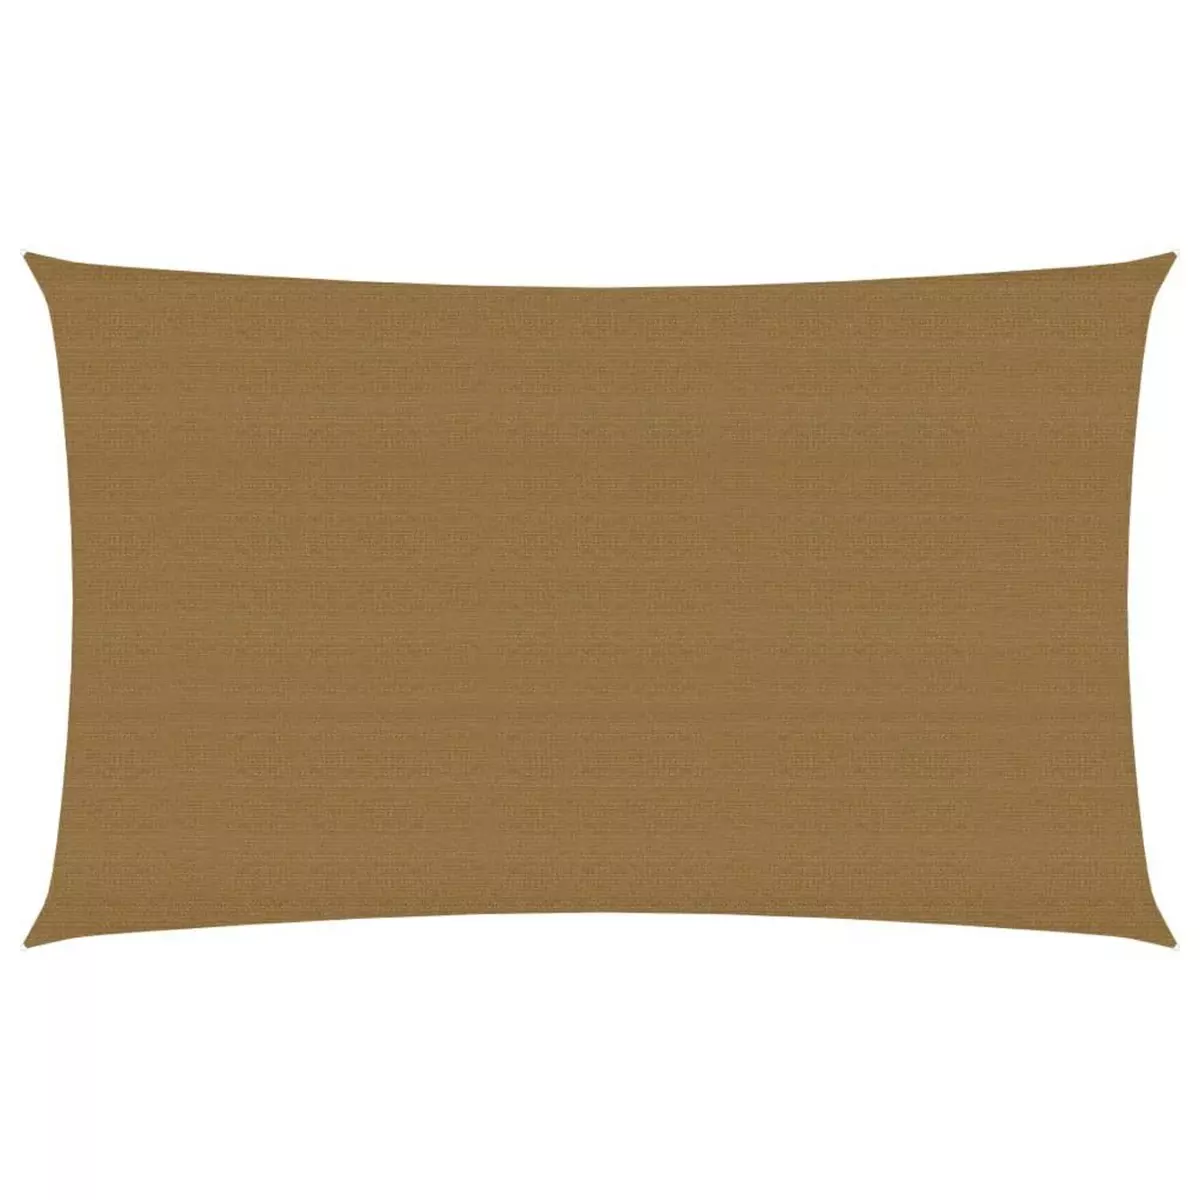 VIDAXL Voile d'ombrage 160 g/m^2 Taupe 2x4,5 m PEHD